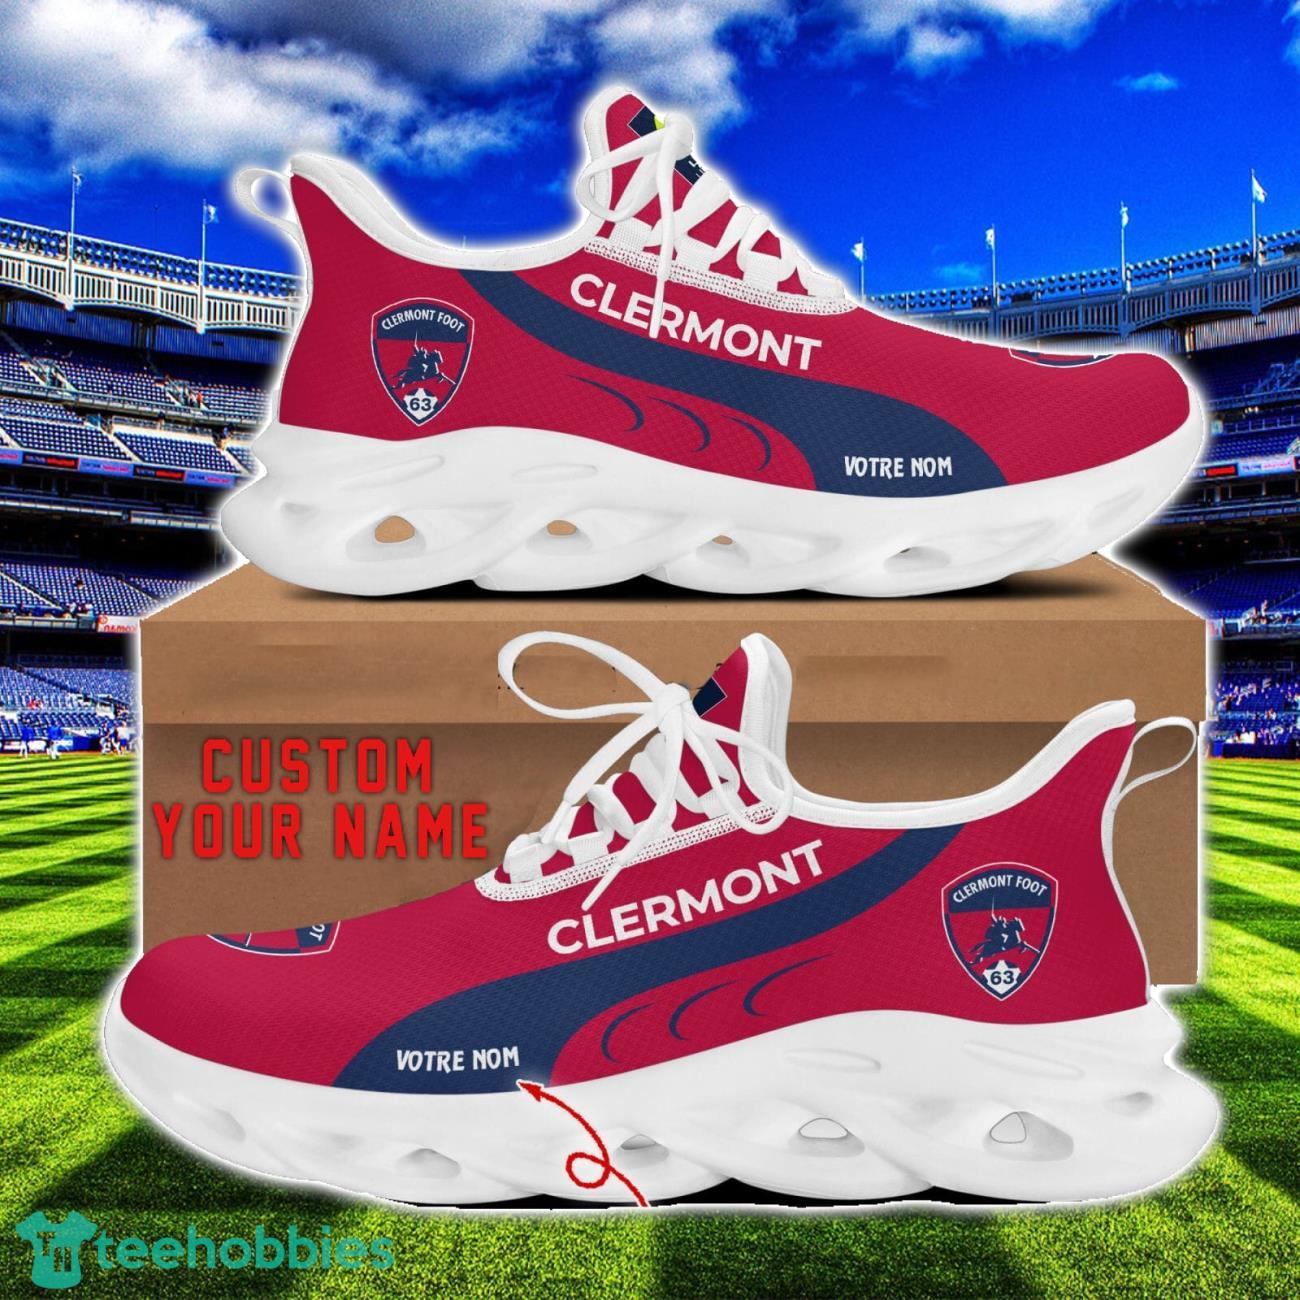 Clermont Foot Auvergne 63 Max Soul Shoes Custom Name Men Women Running Sneakers Product Photo 1